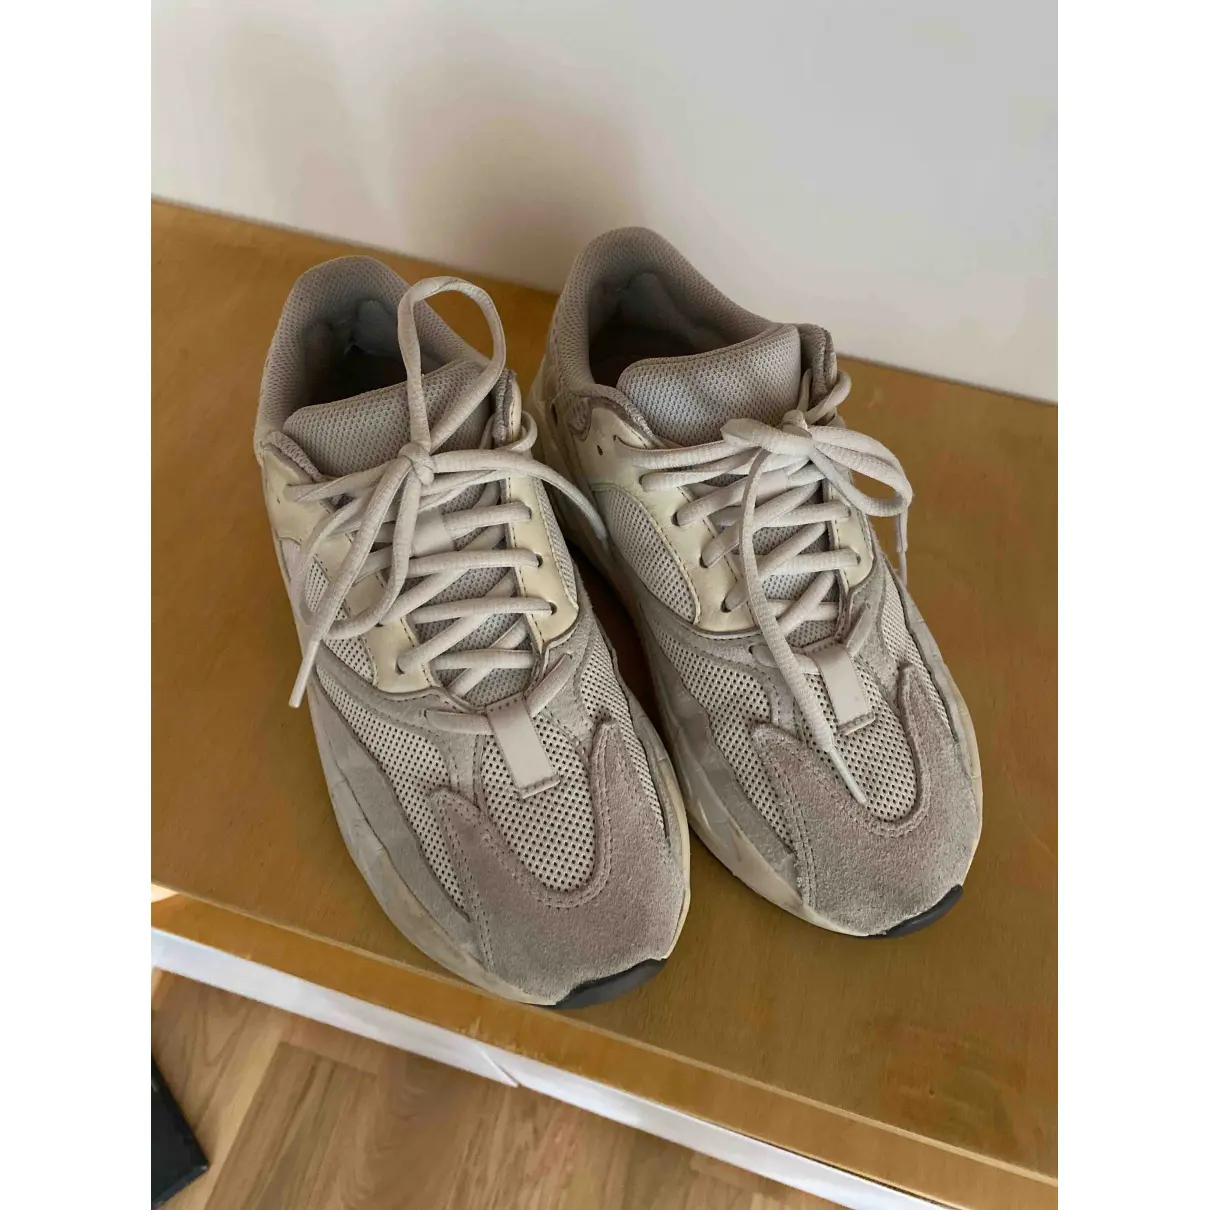 Buy Yeezy Leather trainers online